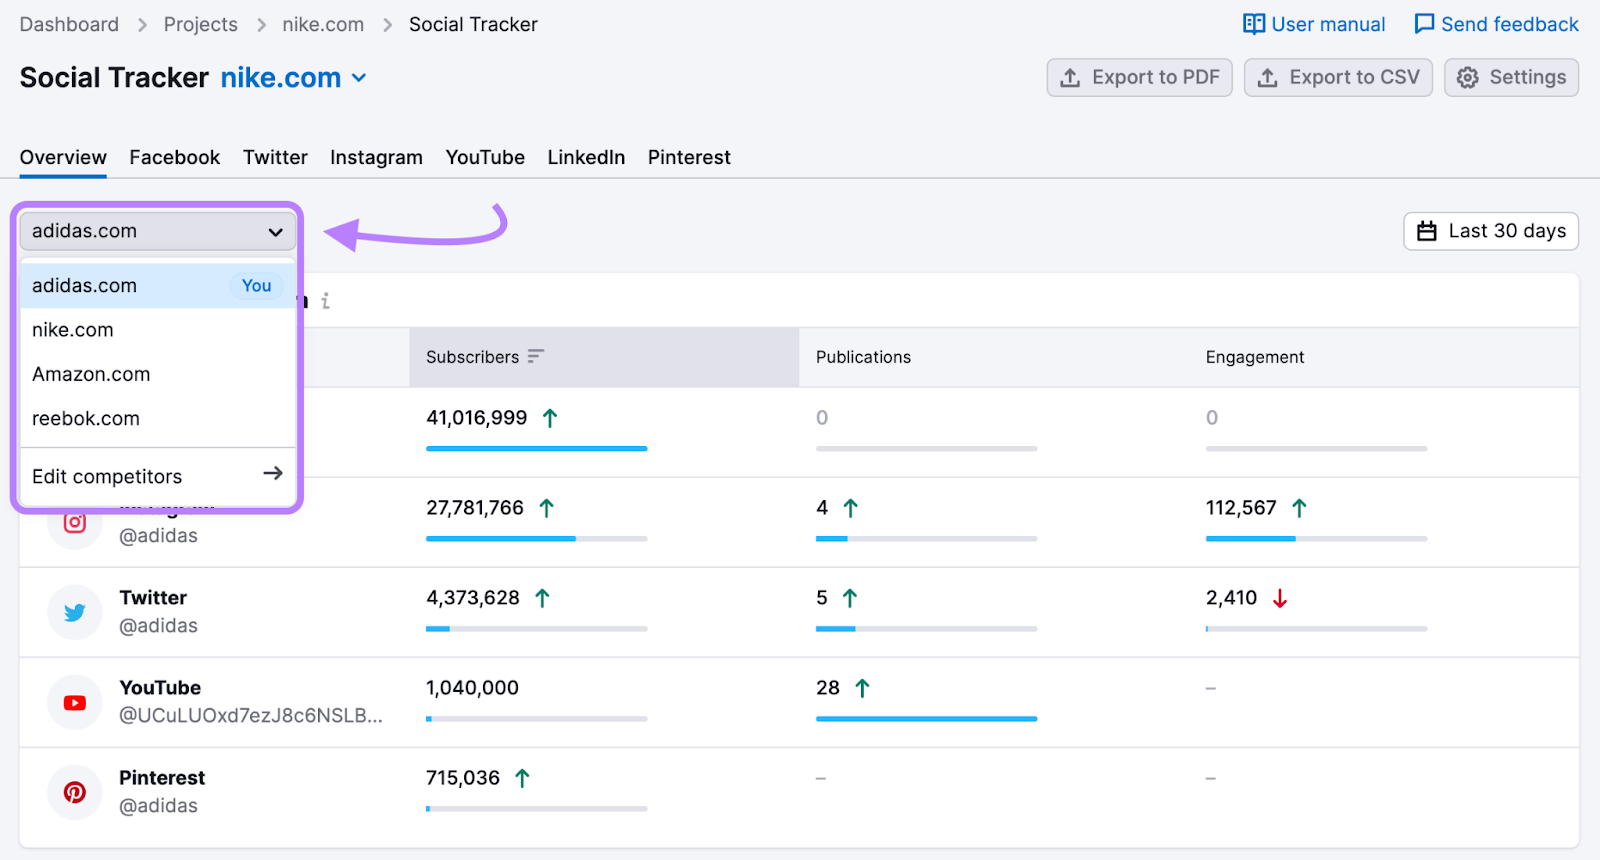 Social Tracker overview dashboard